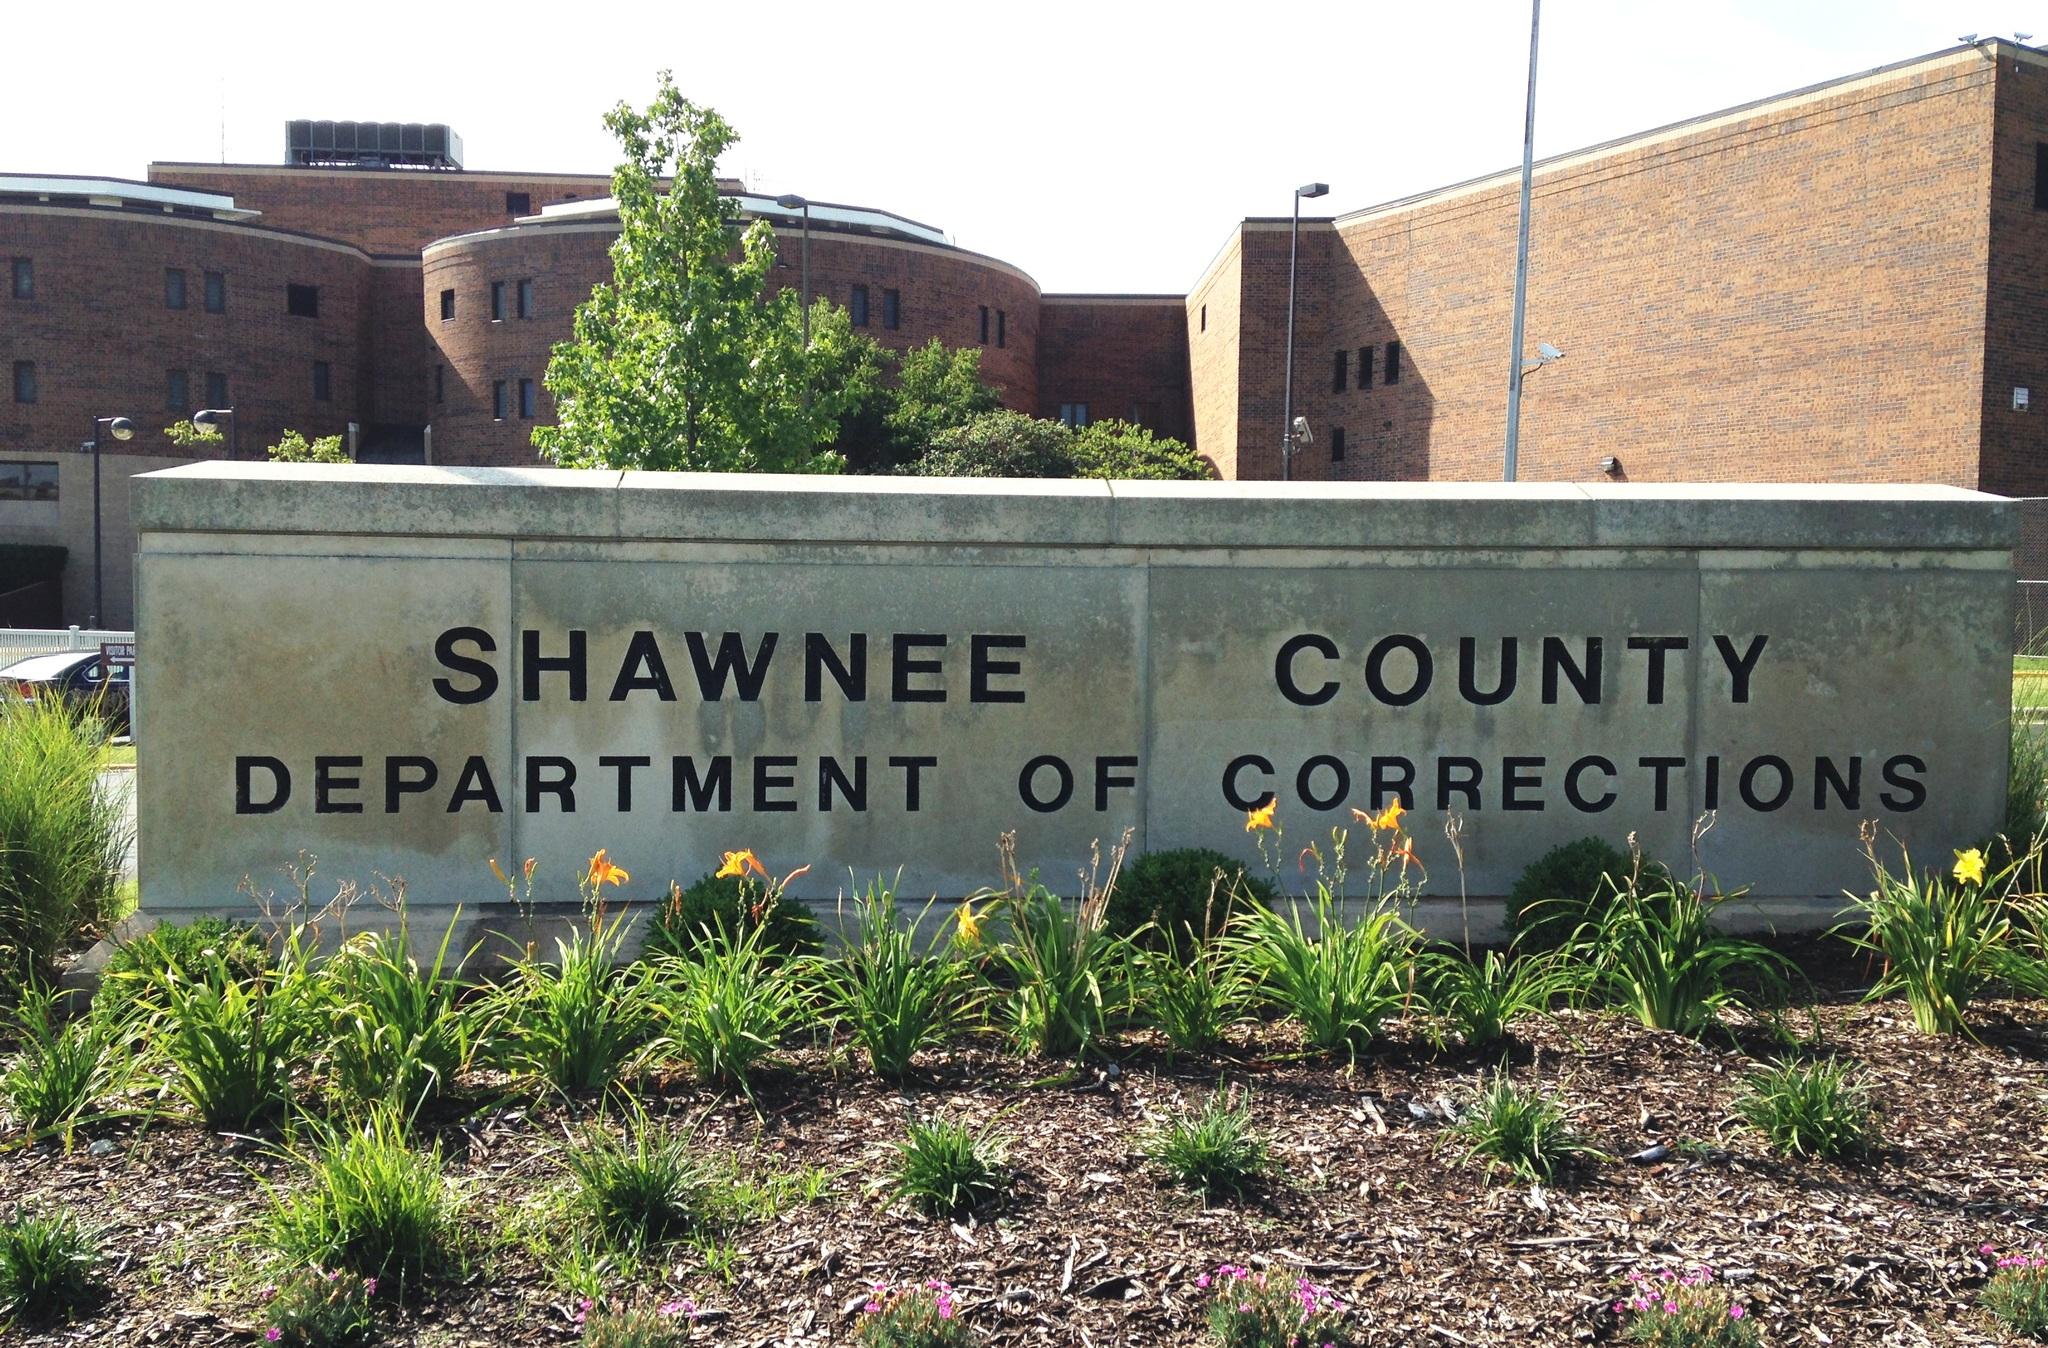 Shawnee County Department of Corrections (Shawnee County